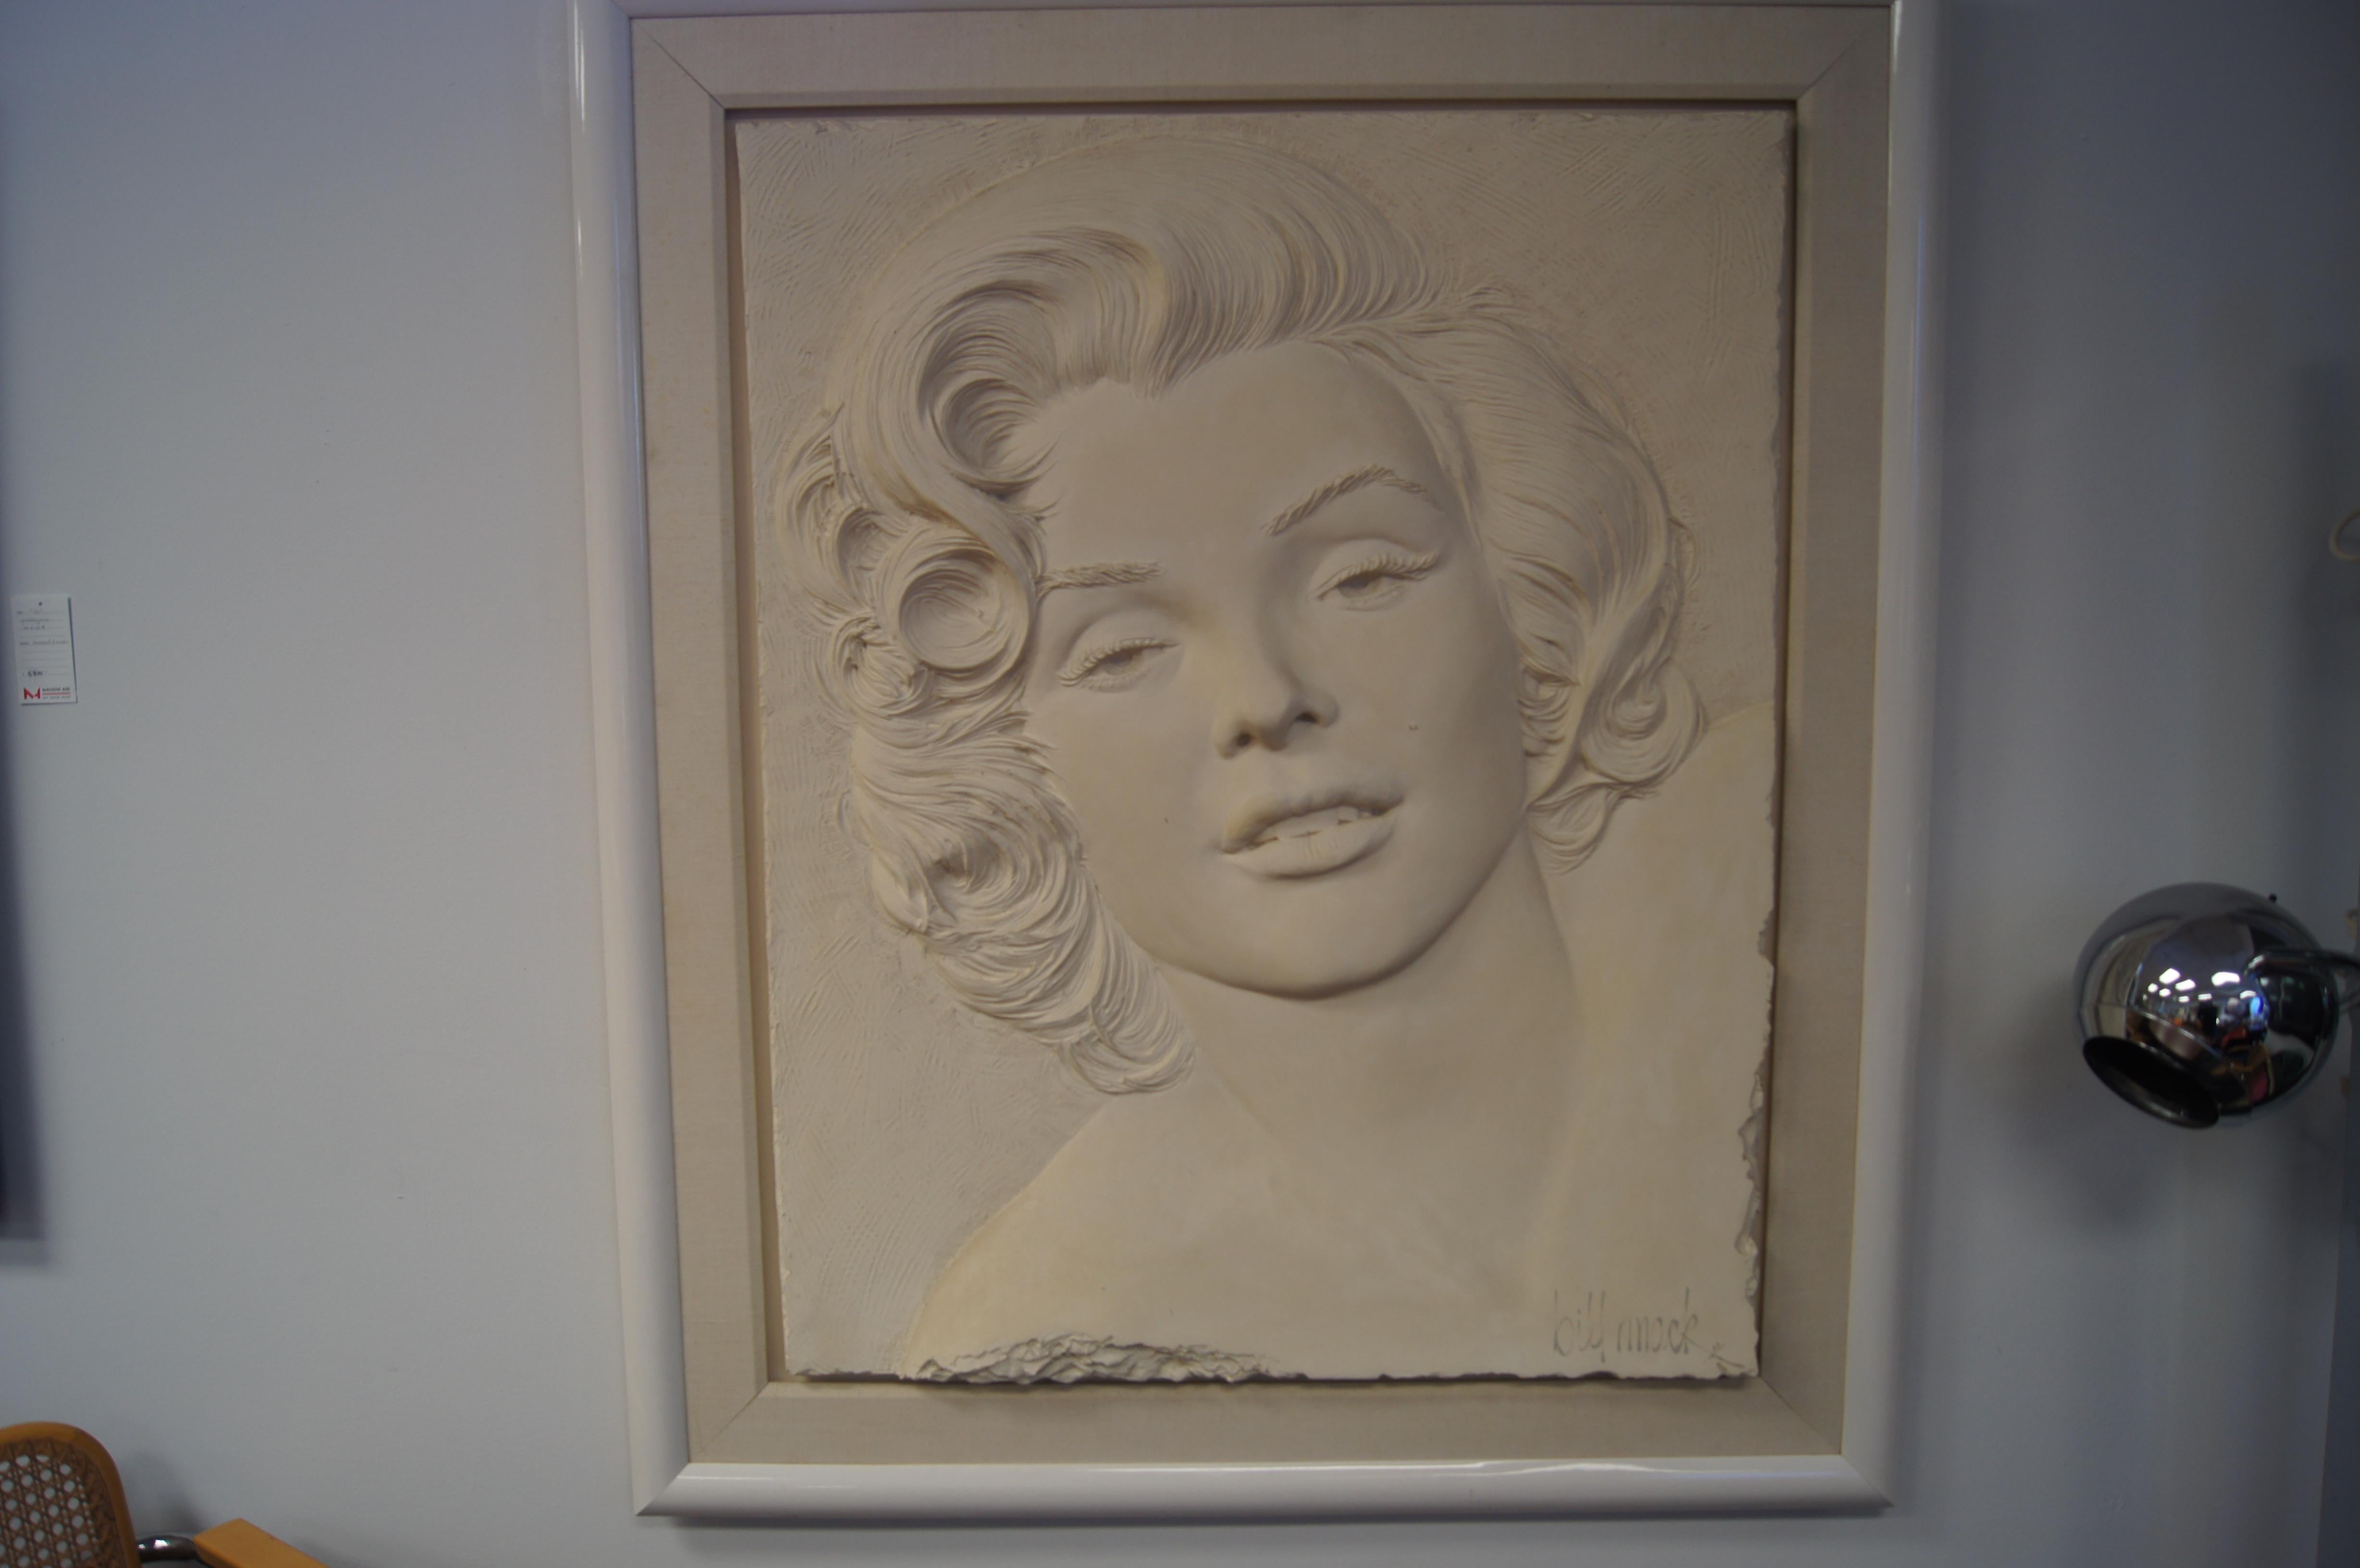 Created by Bill Mack in 1984, this large framed bas relief of Marilyn Monroe is a fine example the artist's best known sculptural technique using resin-bonded sand. It would appeal to any collector of Monroe figurative art.